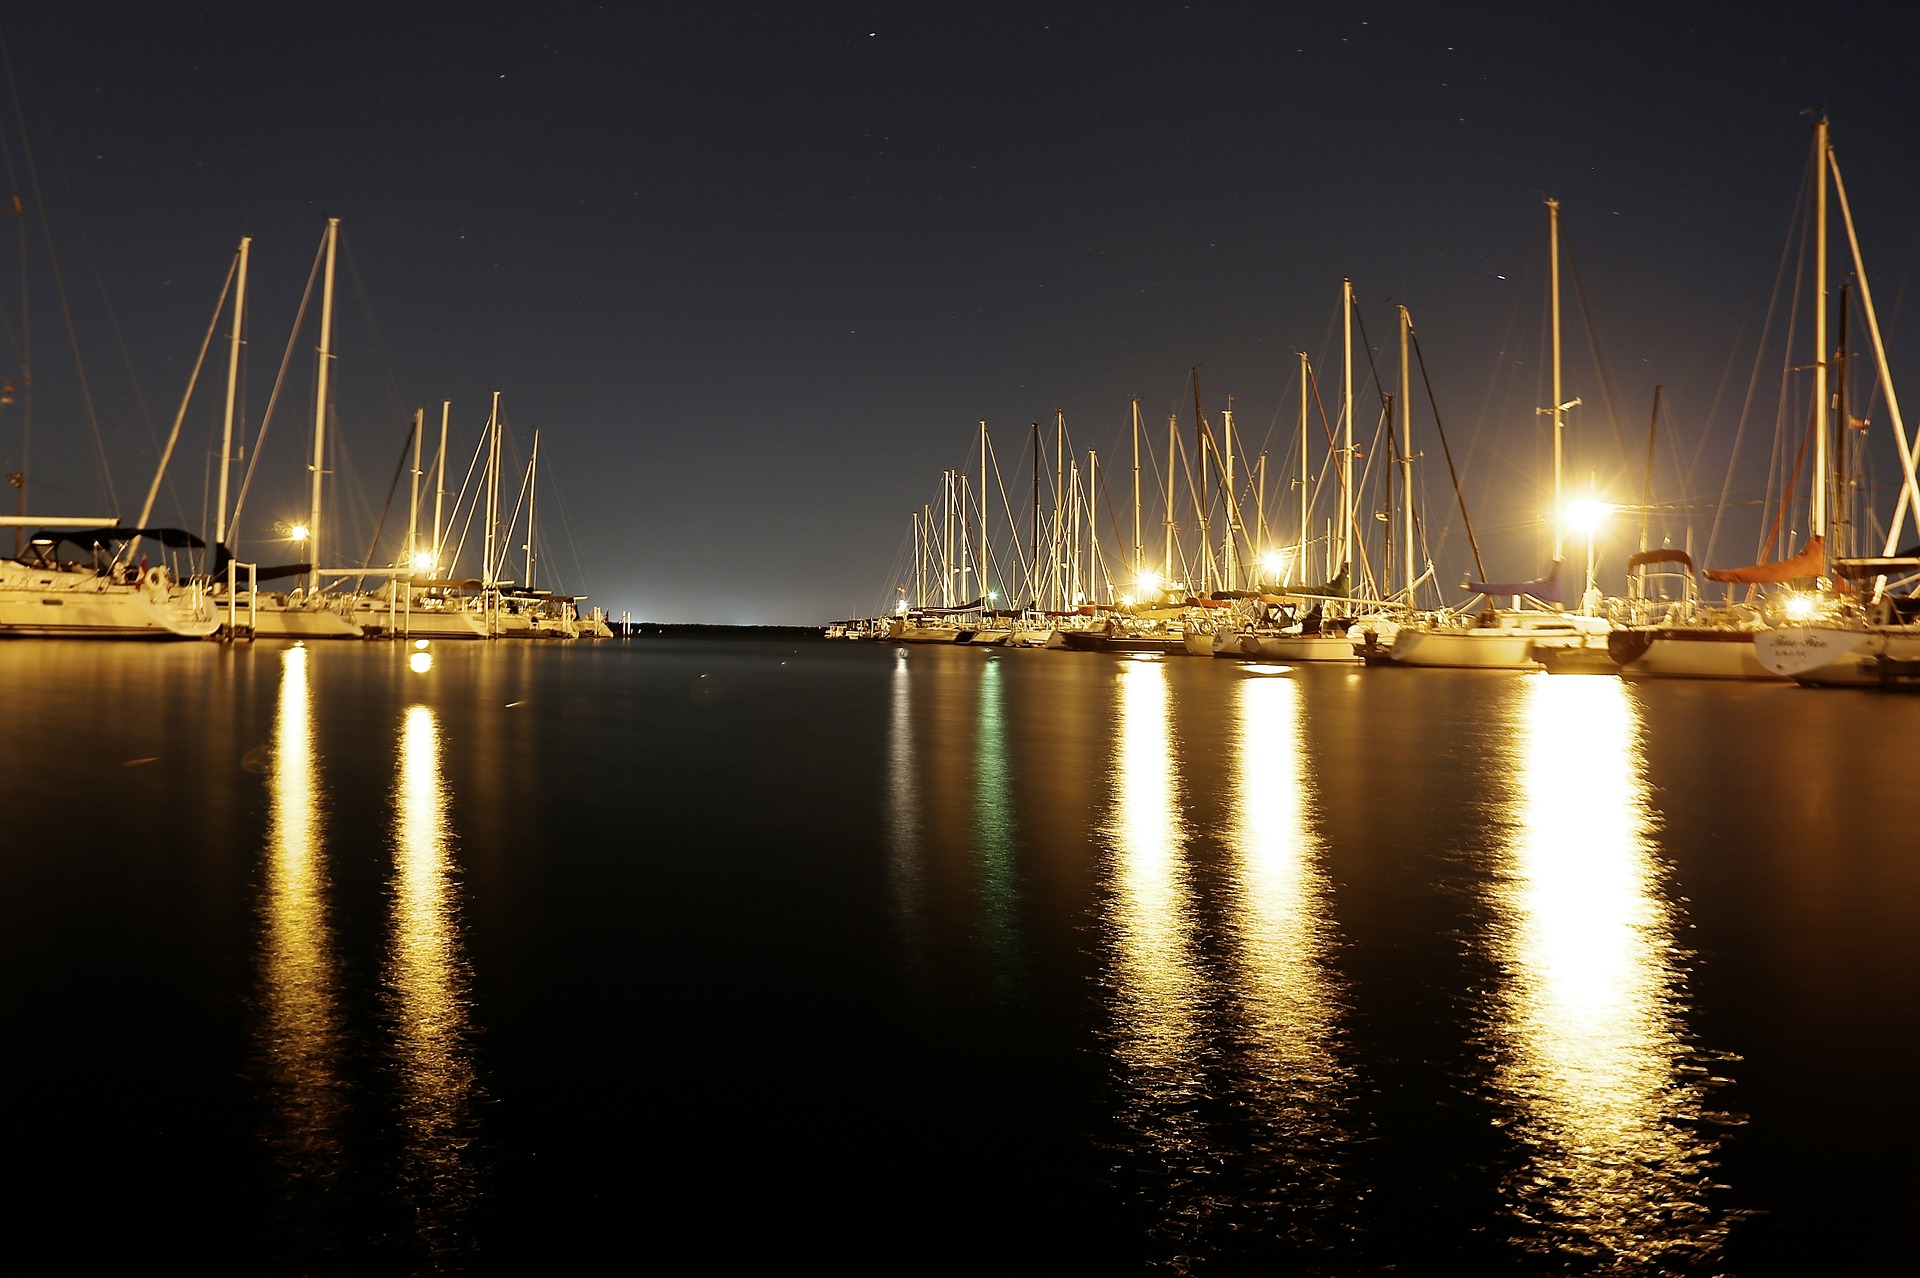 Lights out: tips for nighttime navigation - Xperience Florida Marine